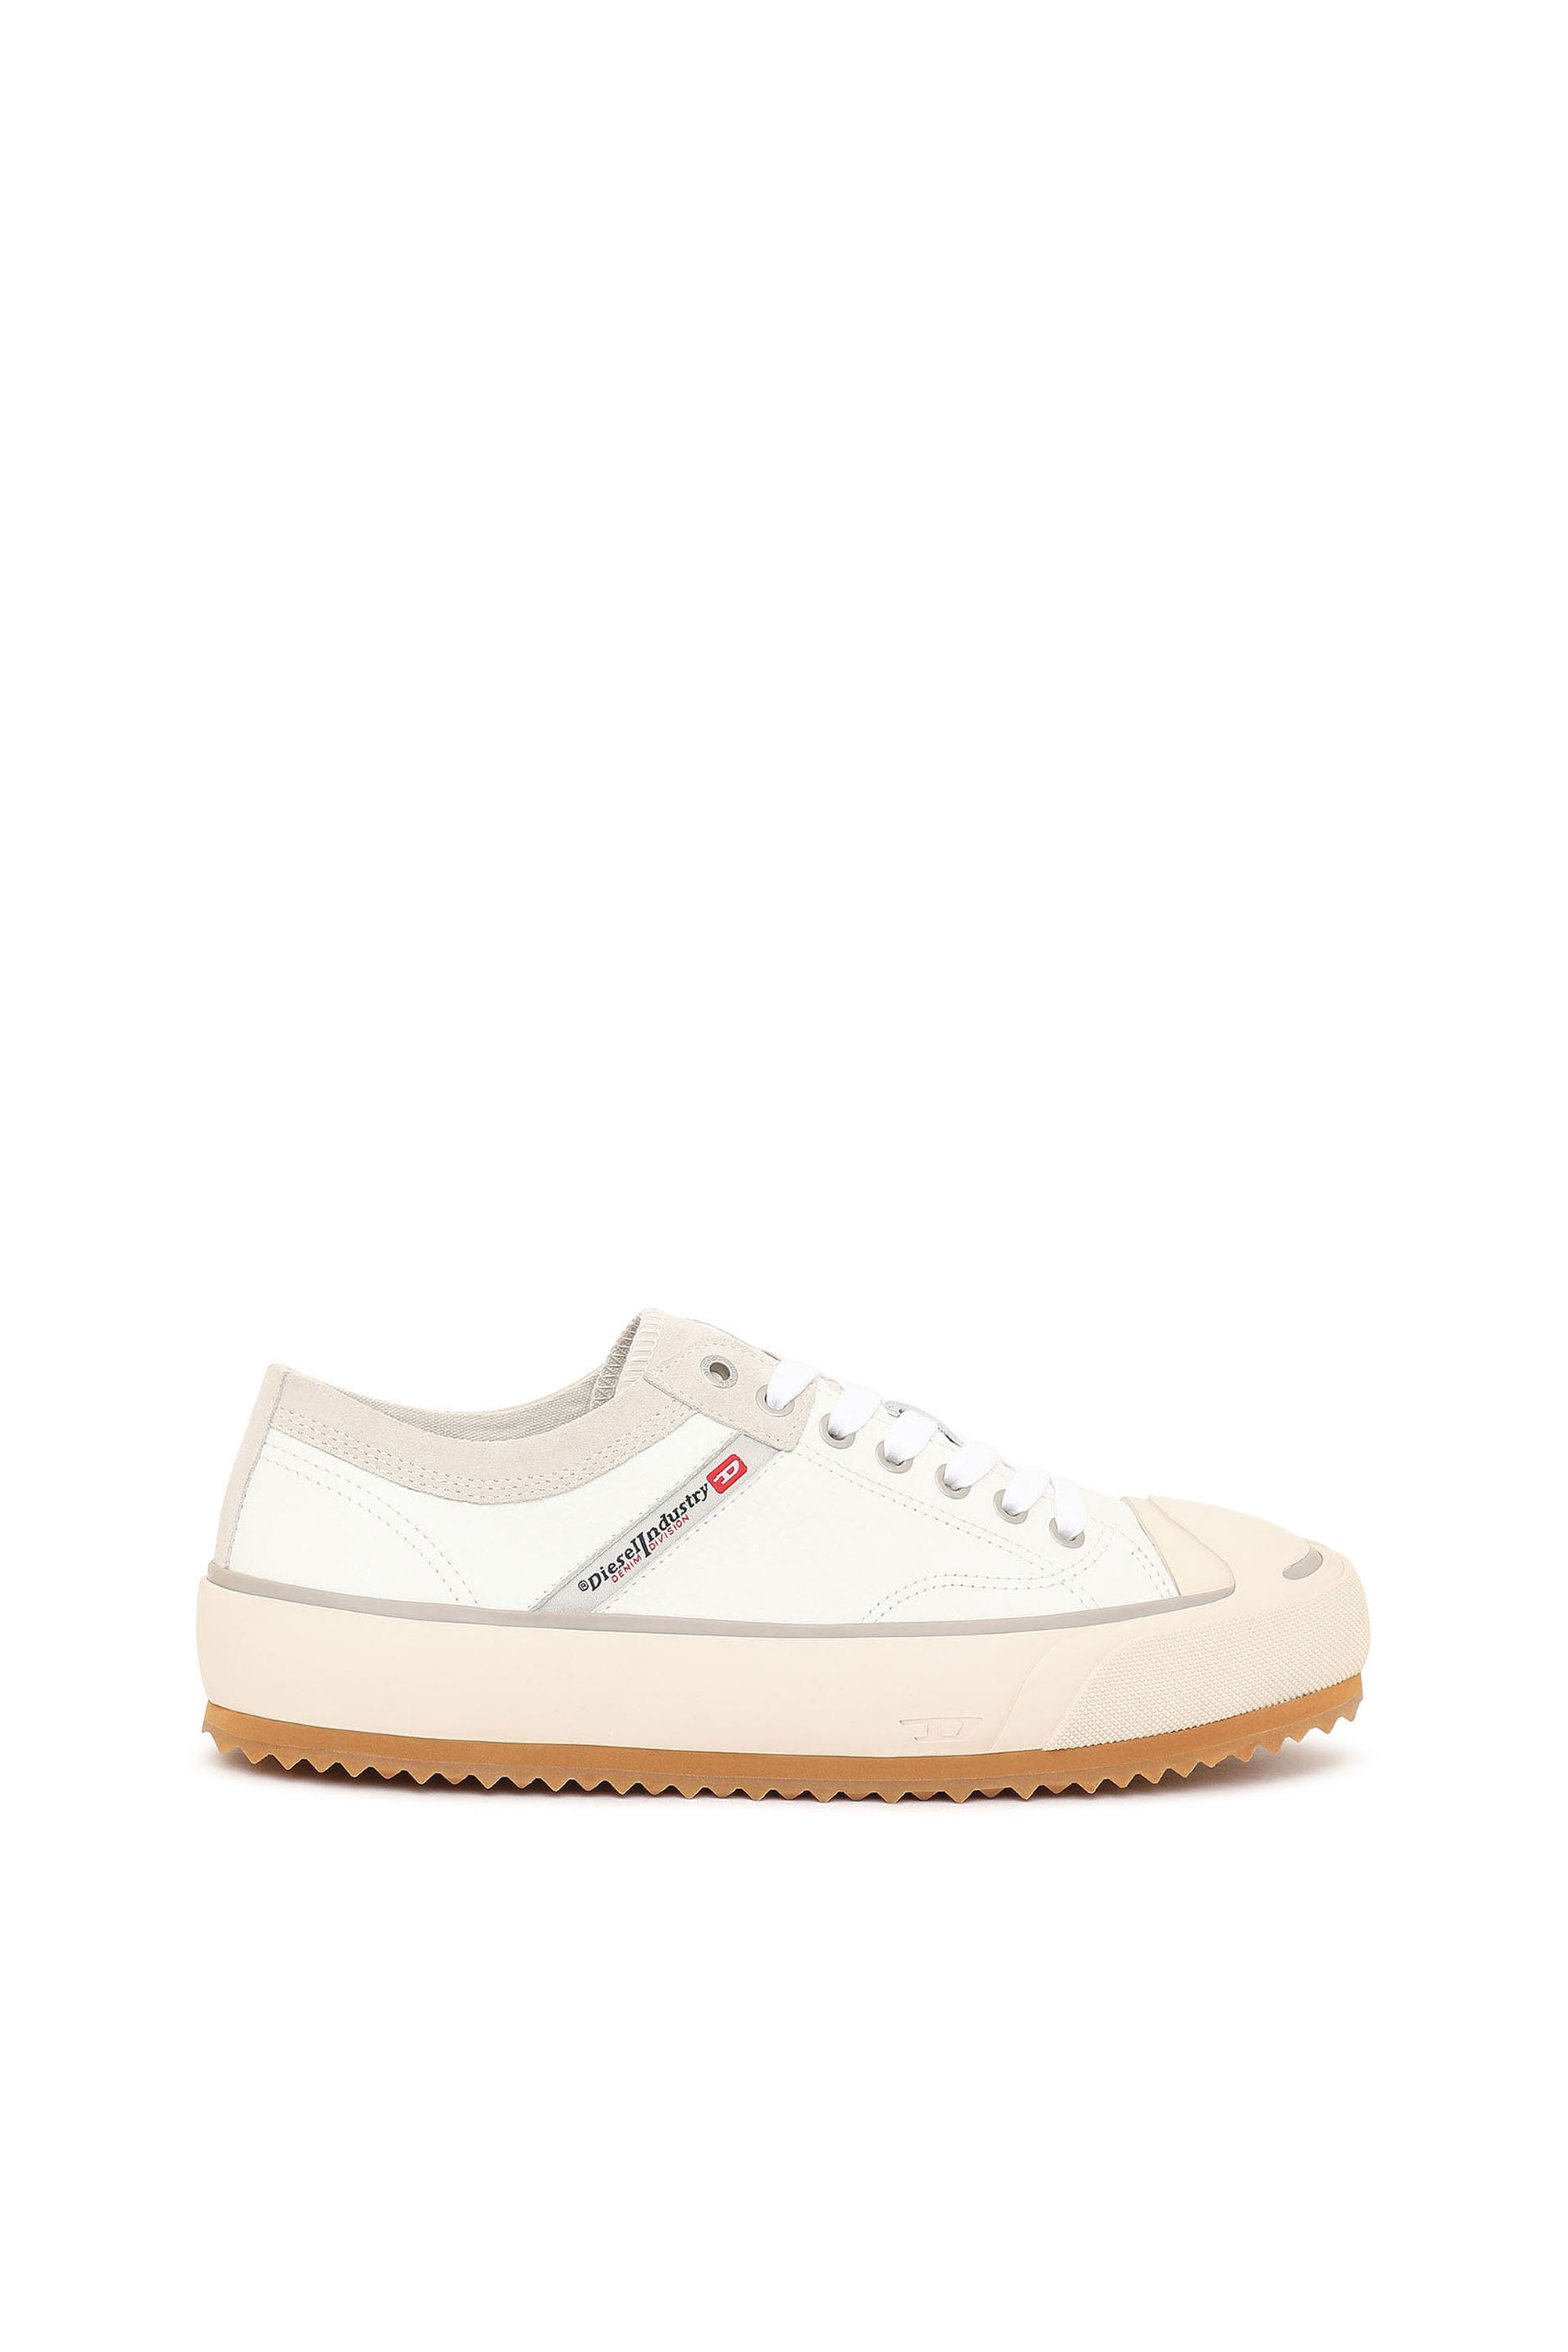 Diesel - S-Principia Low X - Sneakers in leather and suede - Sneakers - Man - White